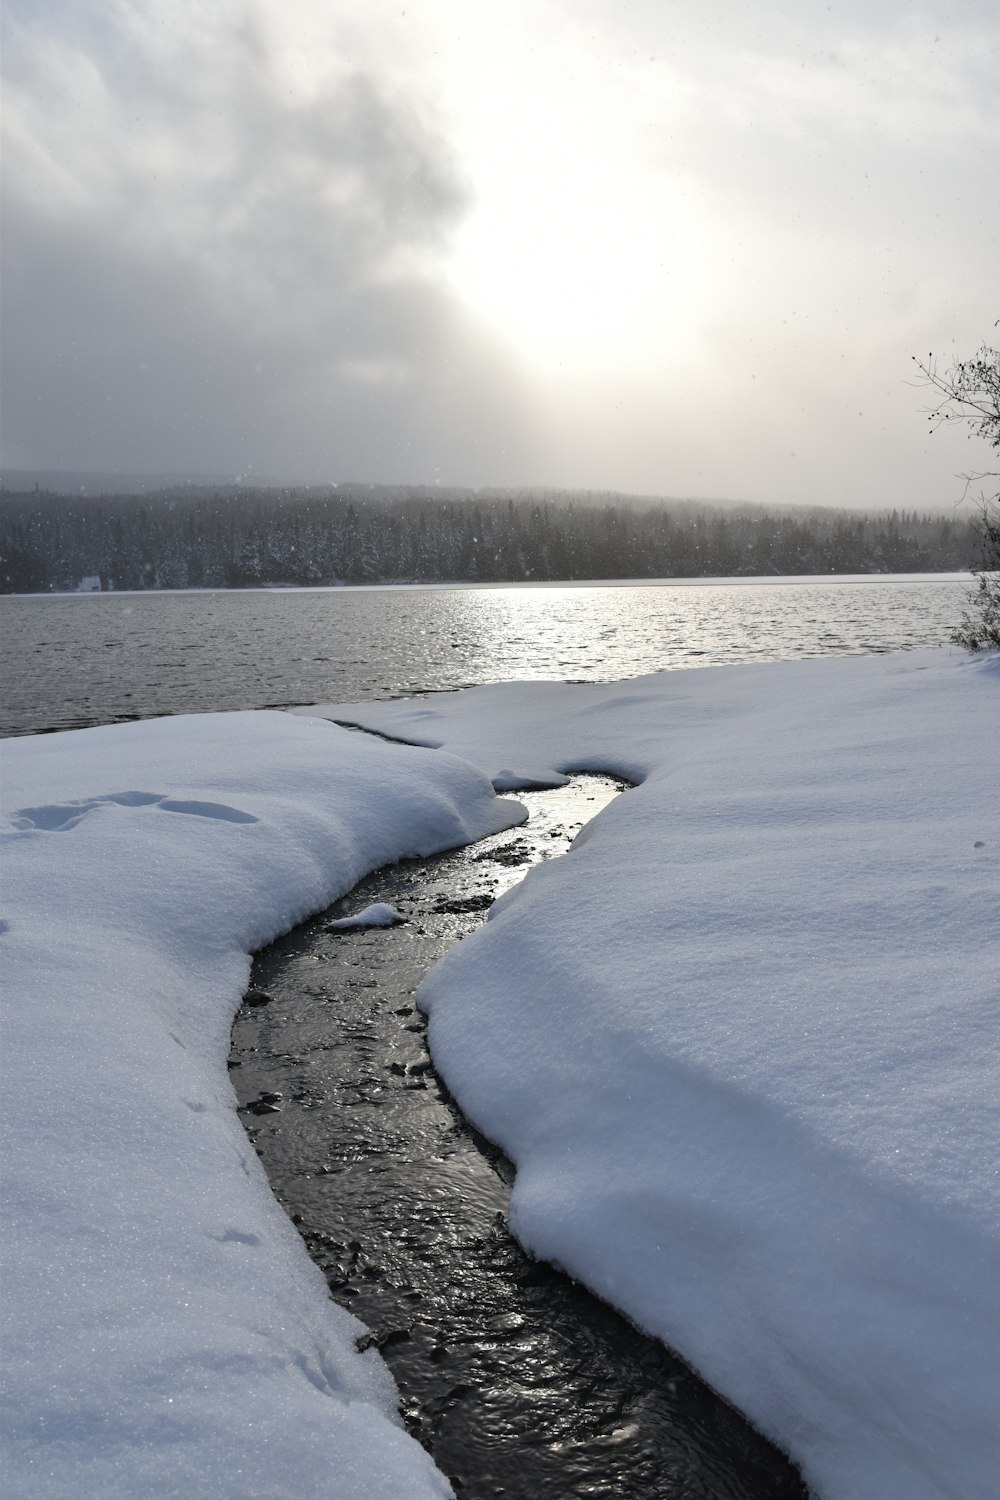 a snowy landscape with a body of water and trees in the background